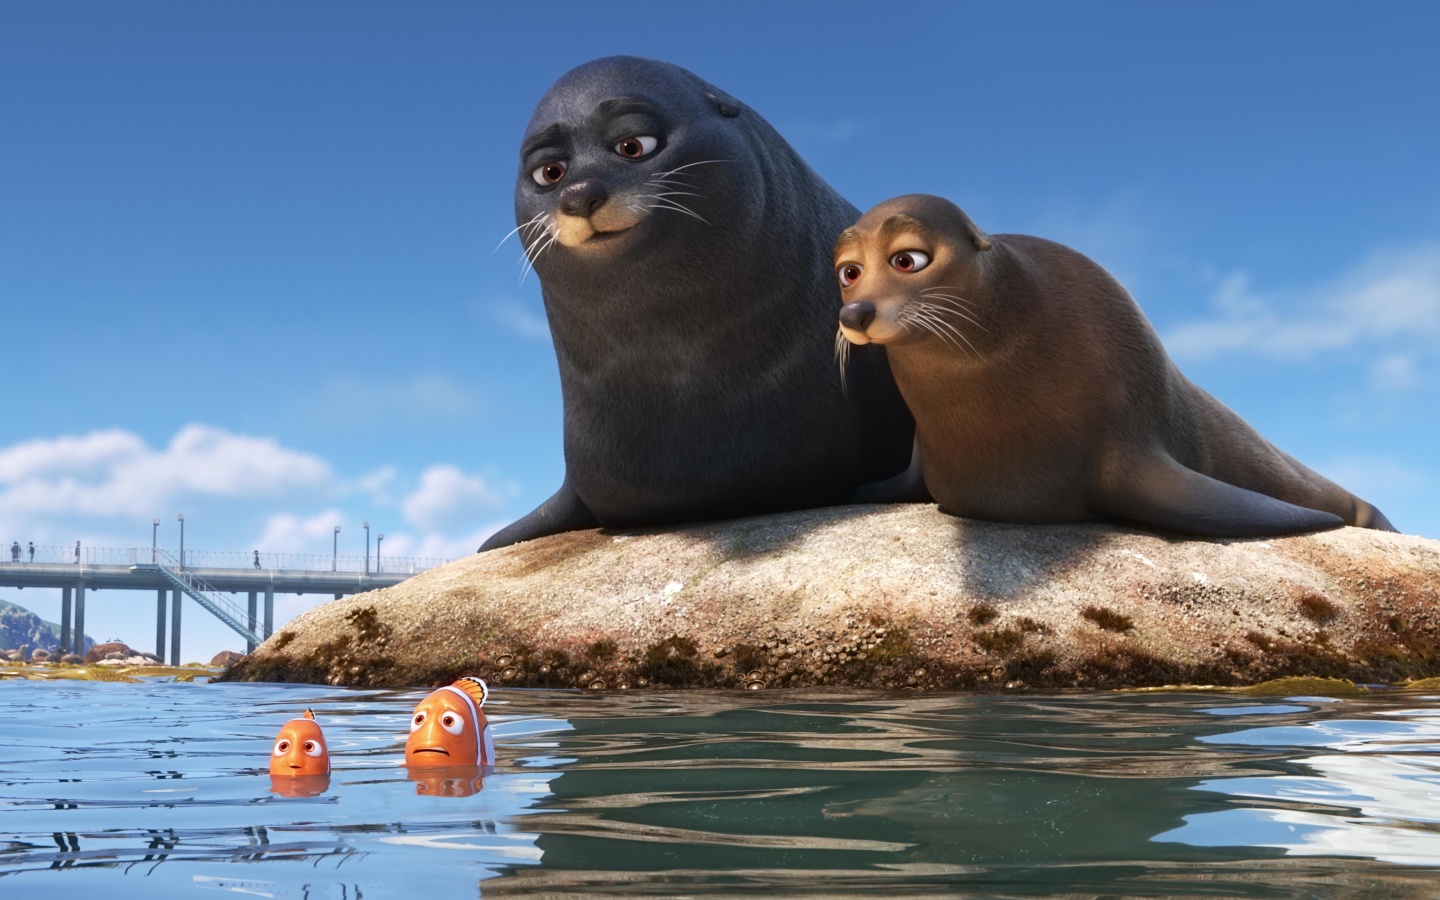 Finding Dory with Fish and Seal wallpaper 1440x900